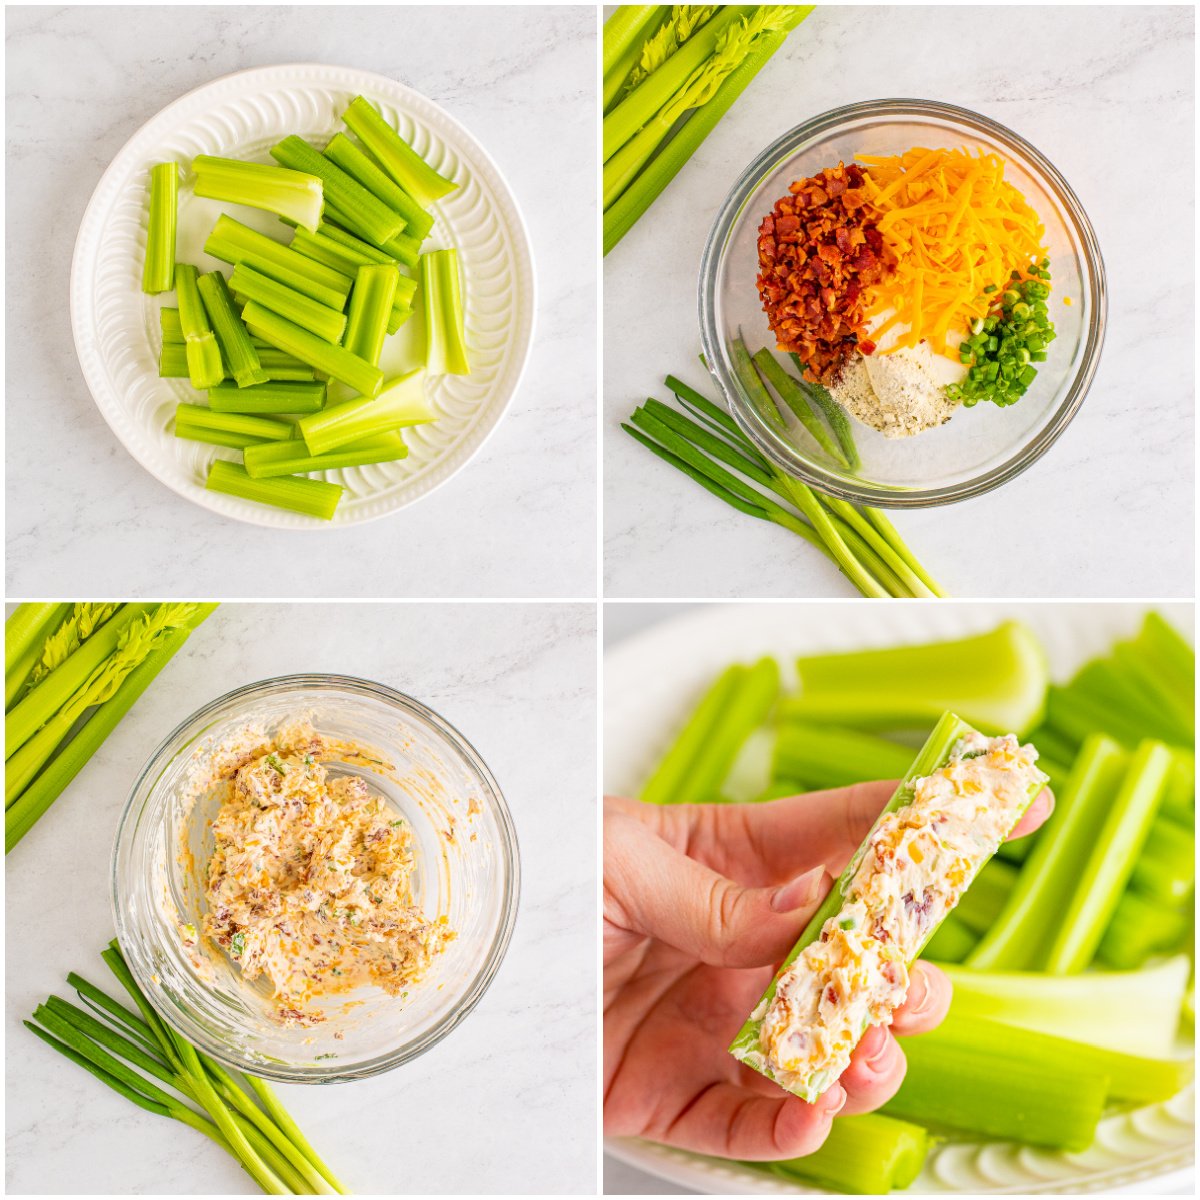 Step by step photos on how to make Cheddar Bacon Ranch Stuffed Celery Sticks.